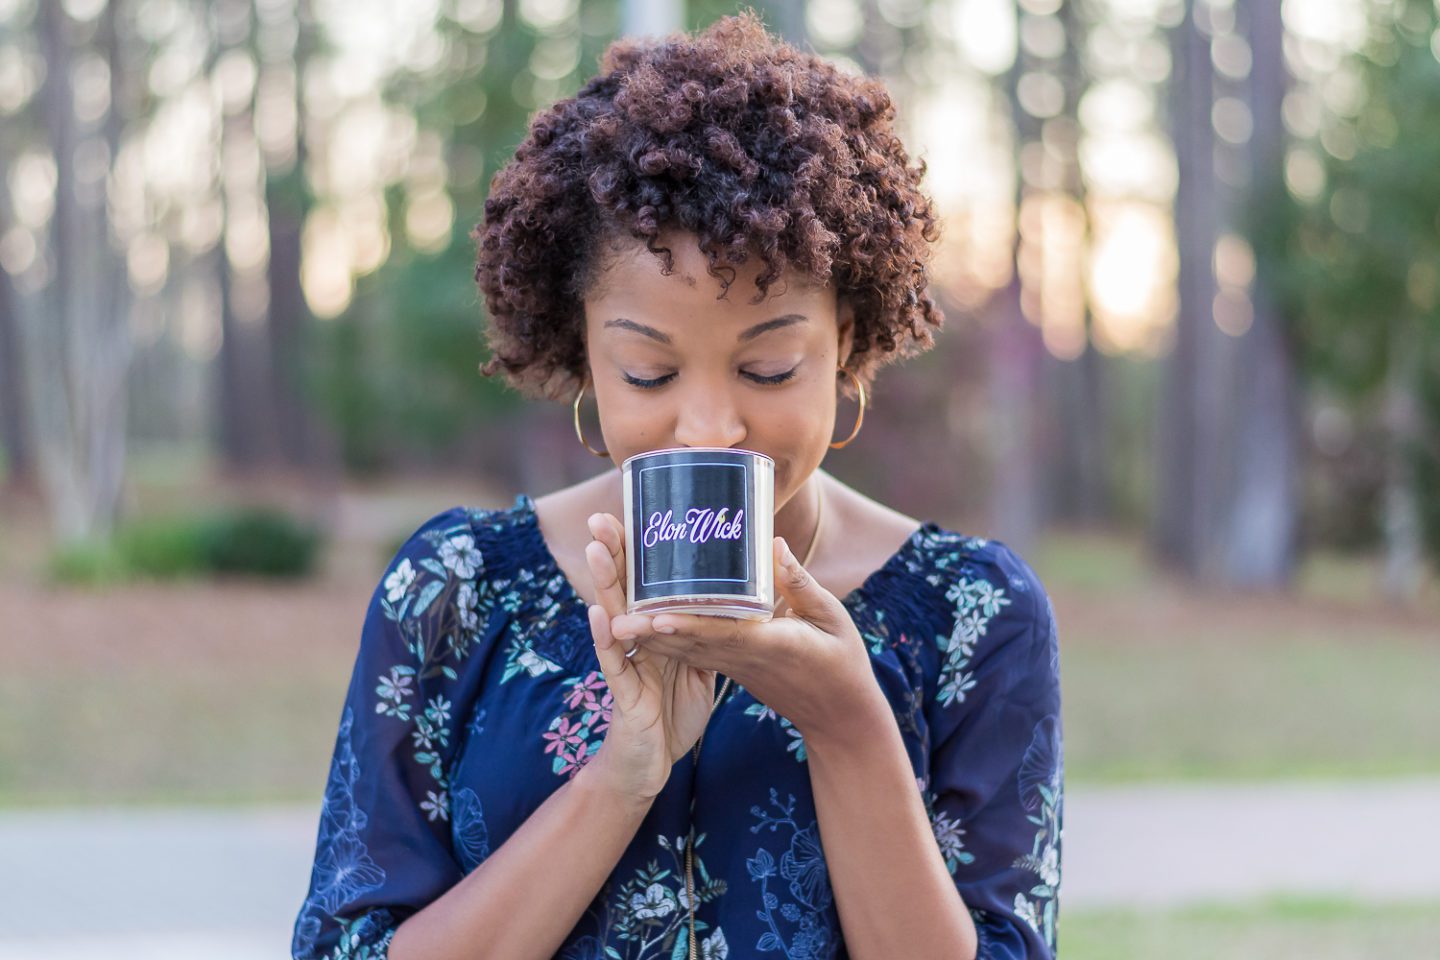 Savannah, GA Entrepreneur with a Passion for Candles